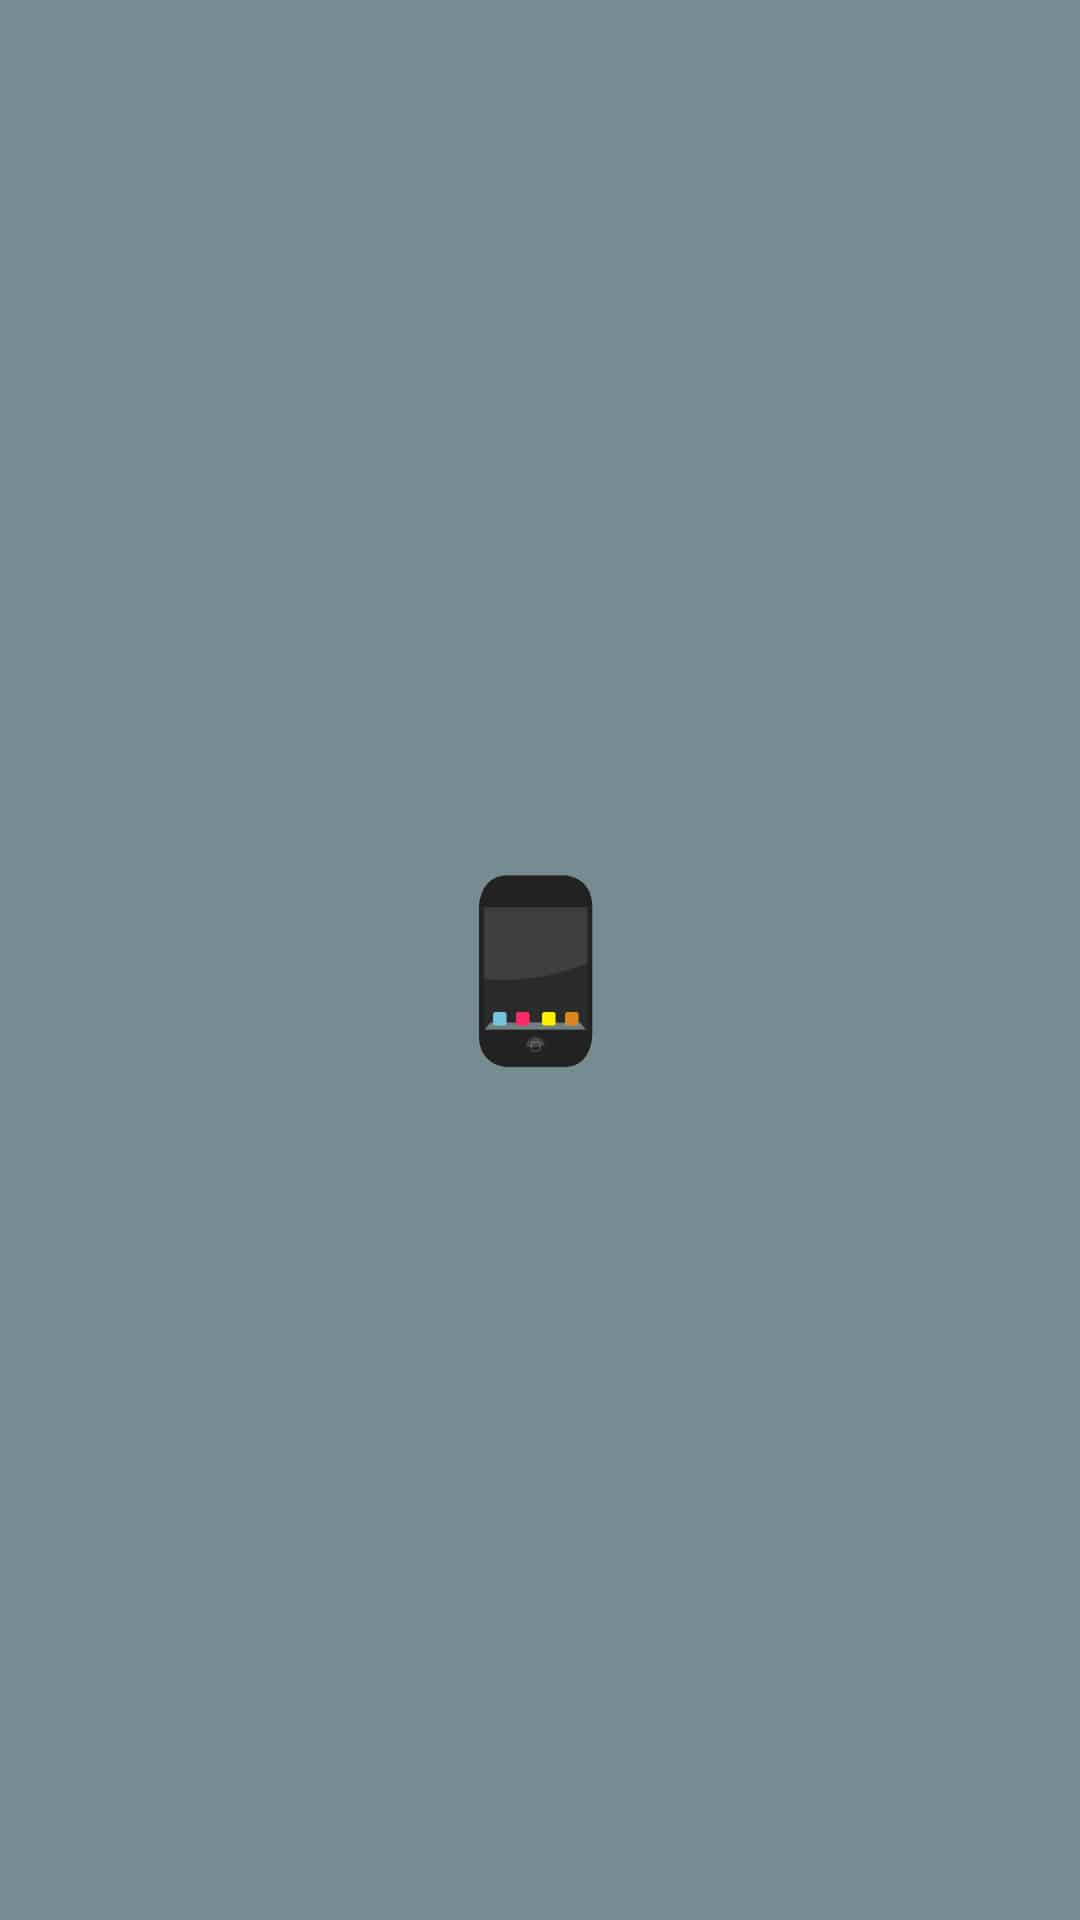 50+ Minimalist iPhone Wallpapers | Man of Many